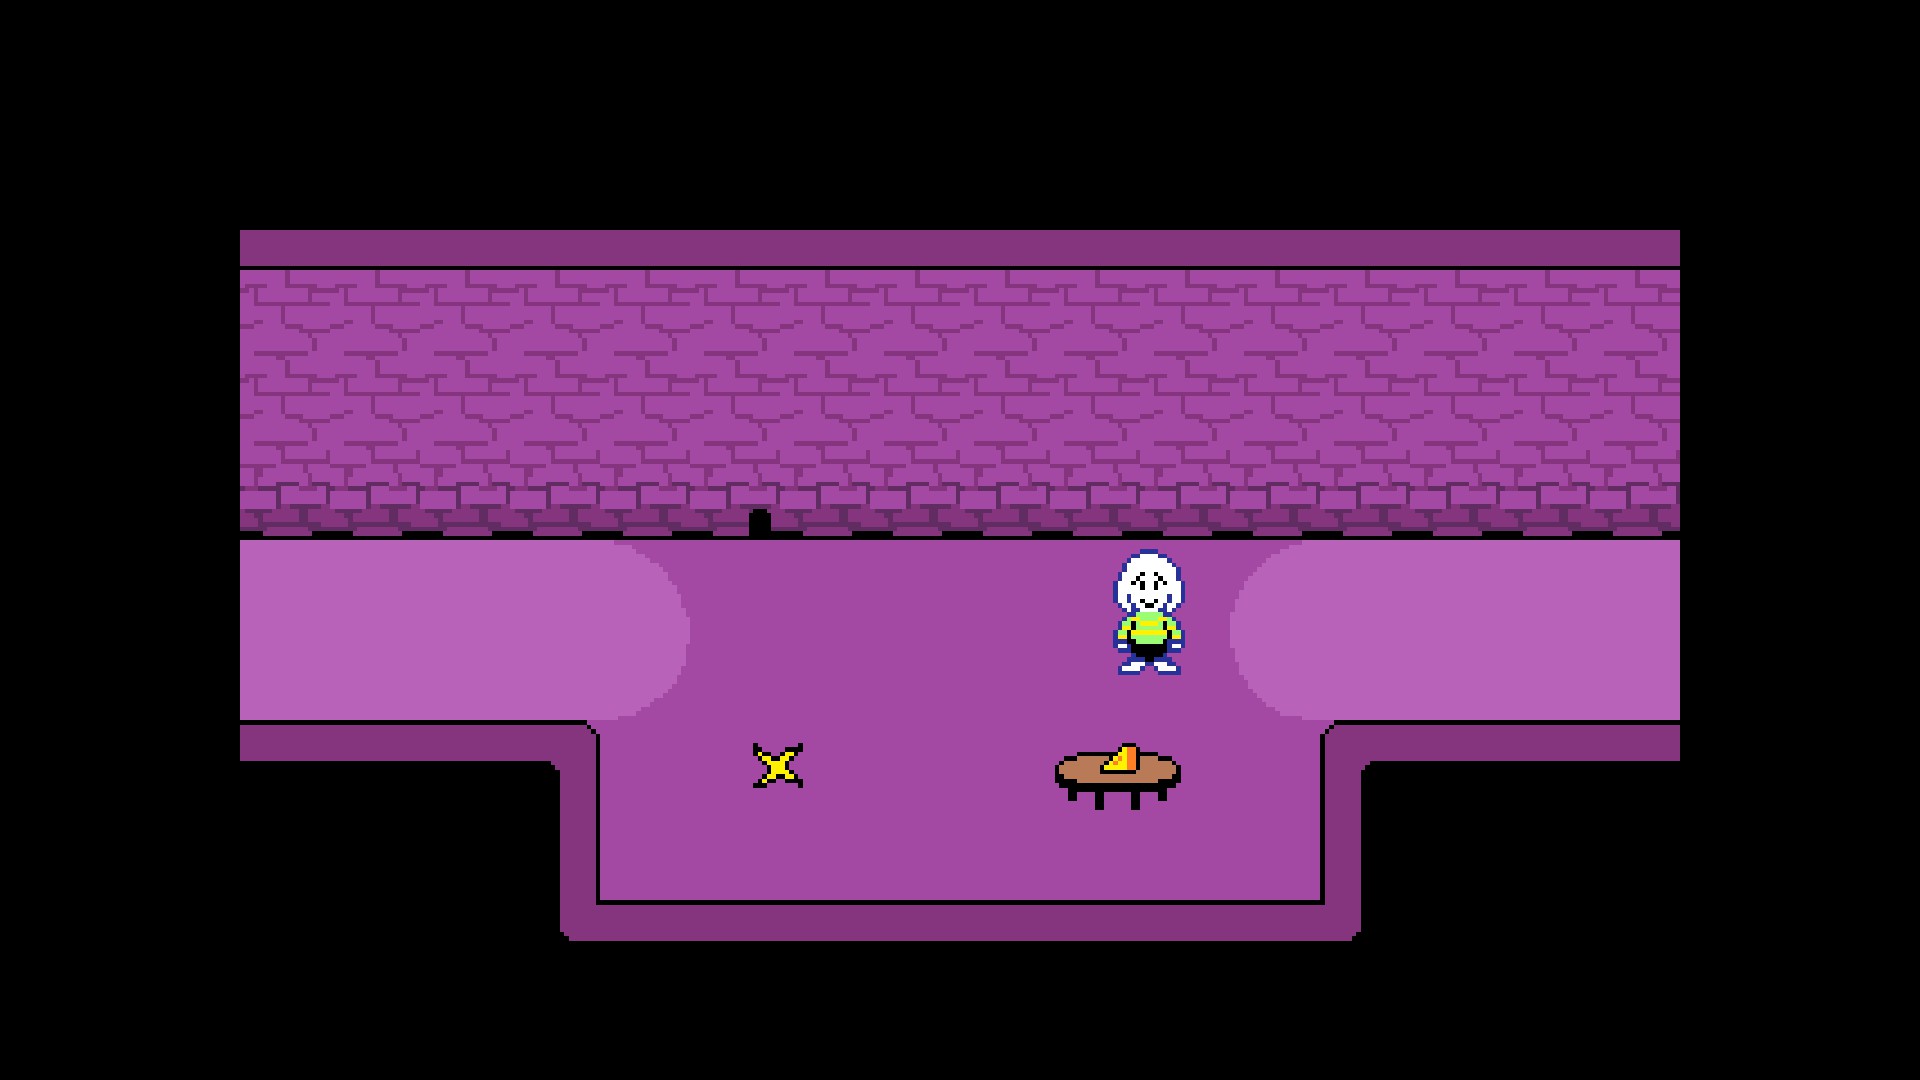 Undertale Together Three - Four Players file - ModDB